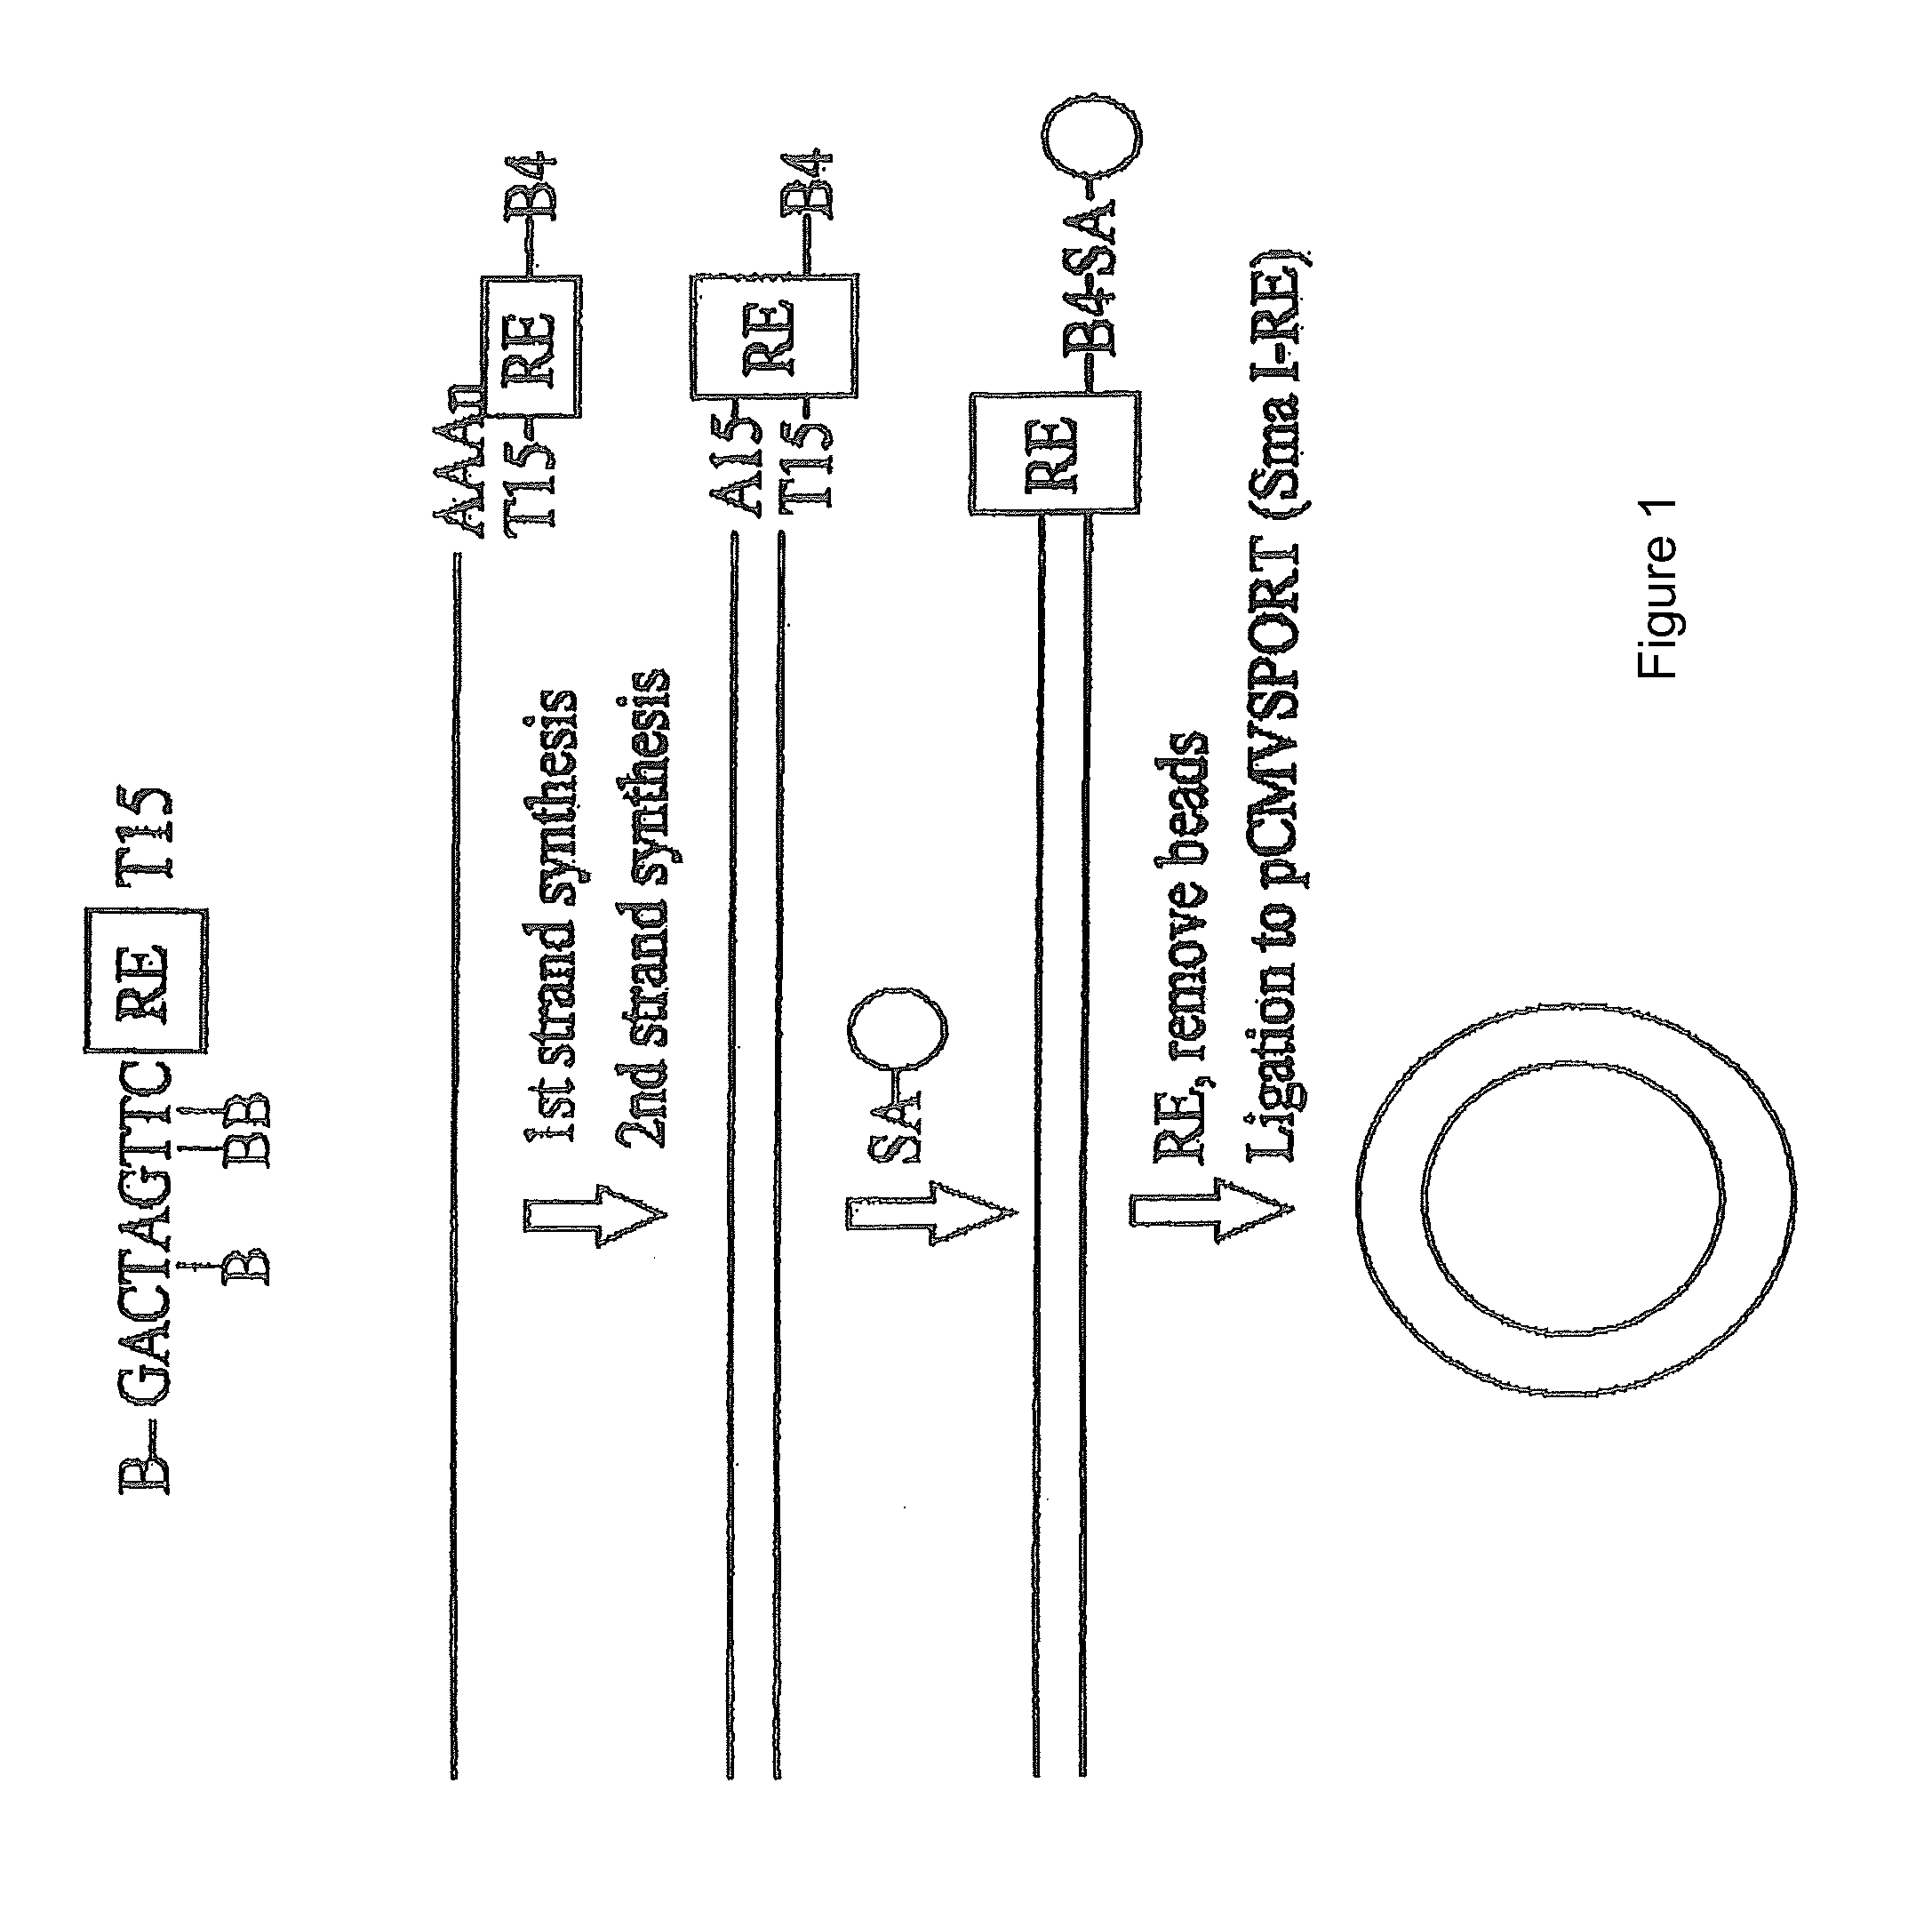 Methods for production and purification of nucleic acid molecules